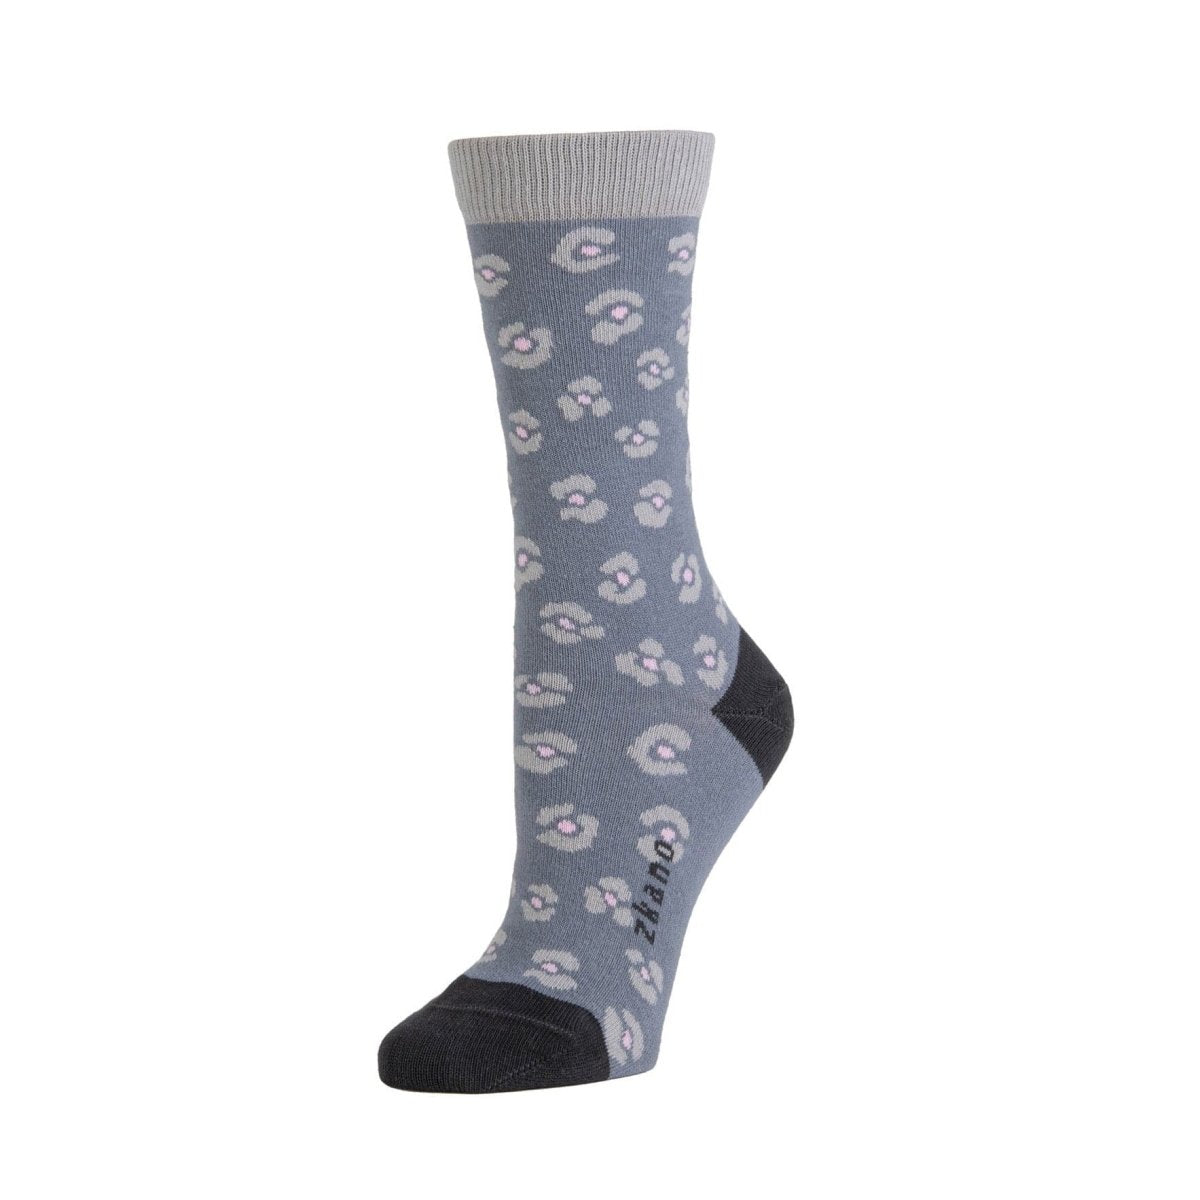 A blue/grey sock with a light blue and pink cheetah pattern. Toe and heel of sock are dark blue, including the logo along the arch. The Cheetah Print Crew in Pewter is from Zkano and made in Alabama, USA.